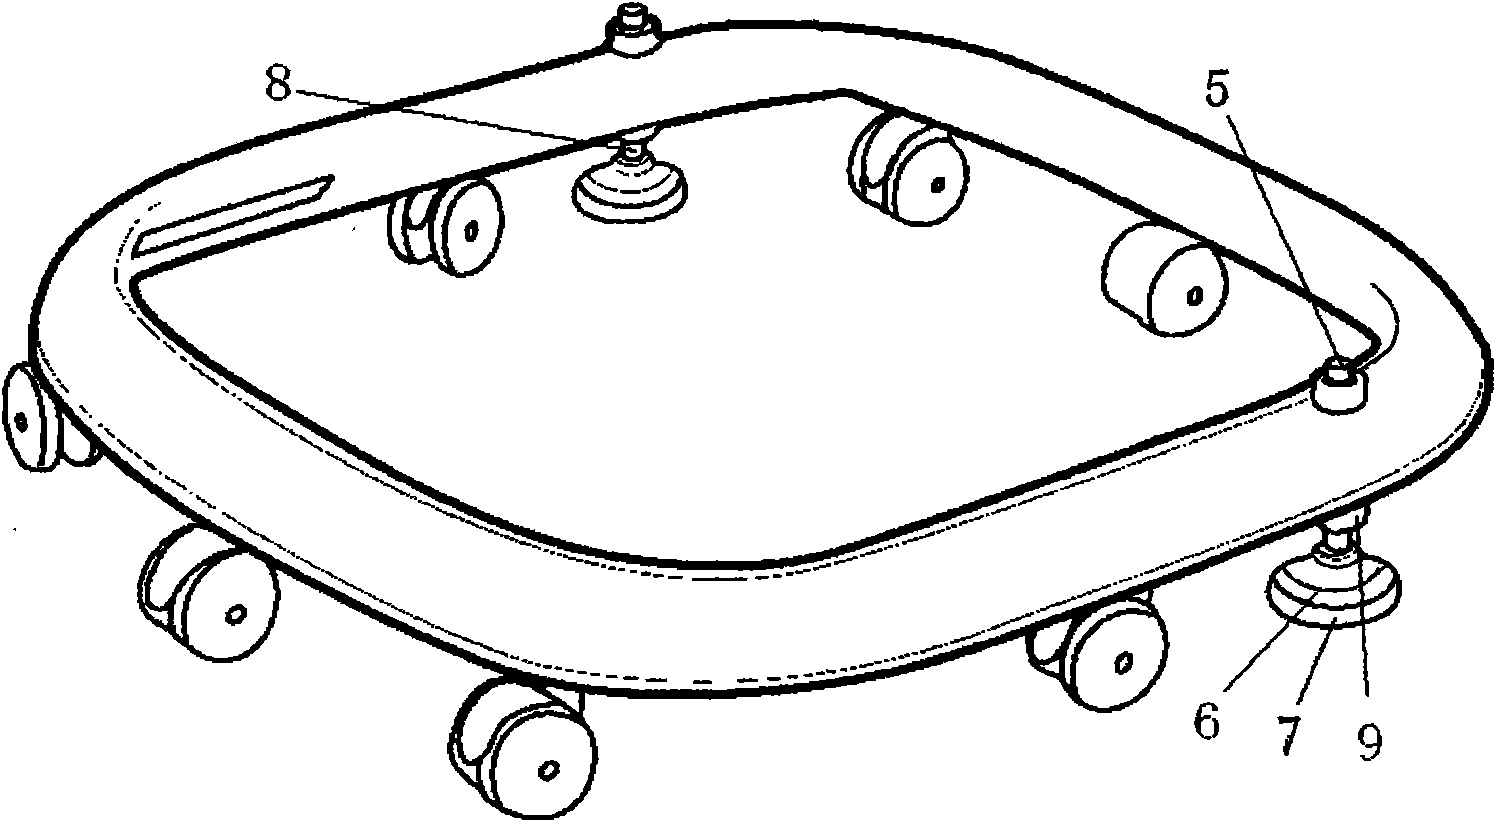 Baby walker with braking structure